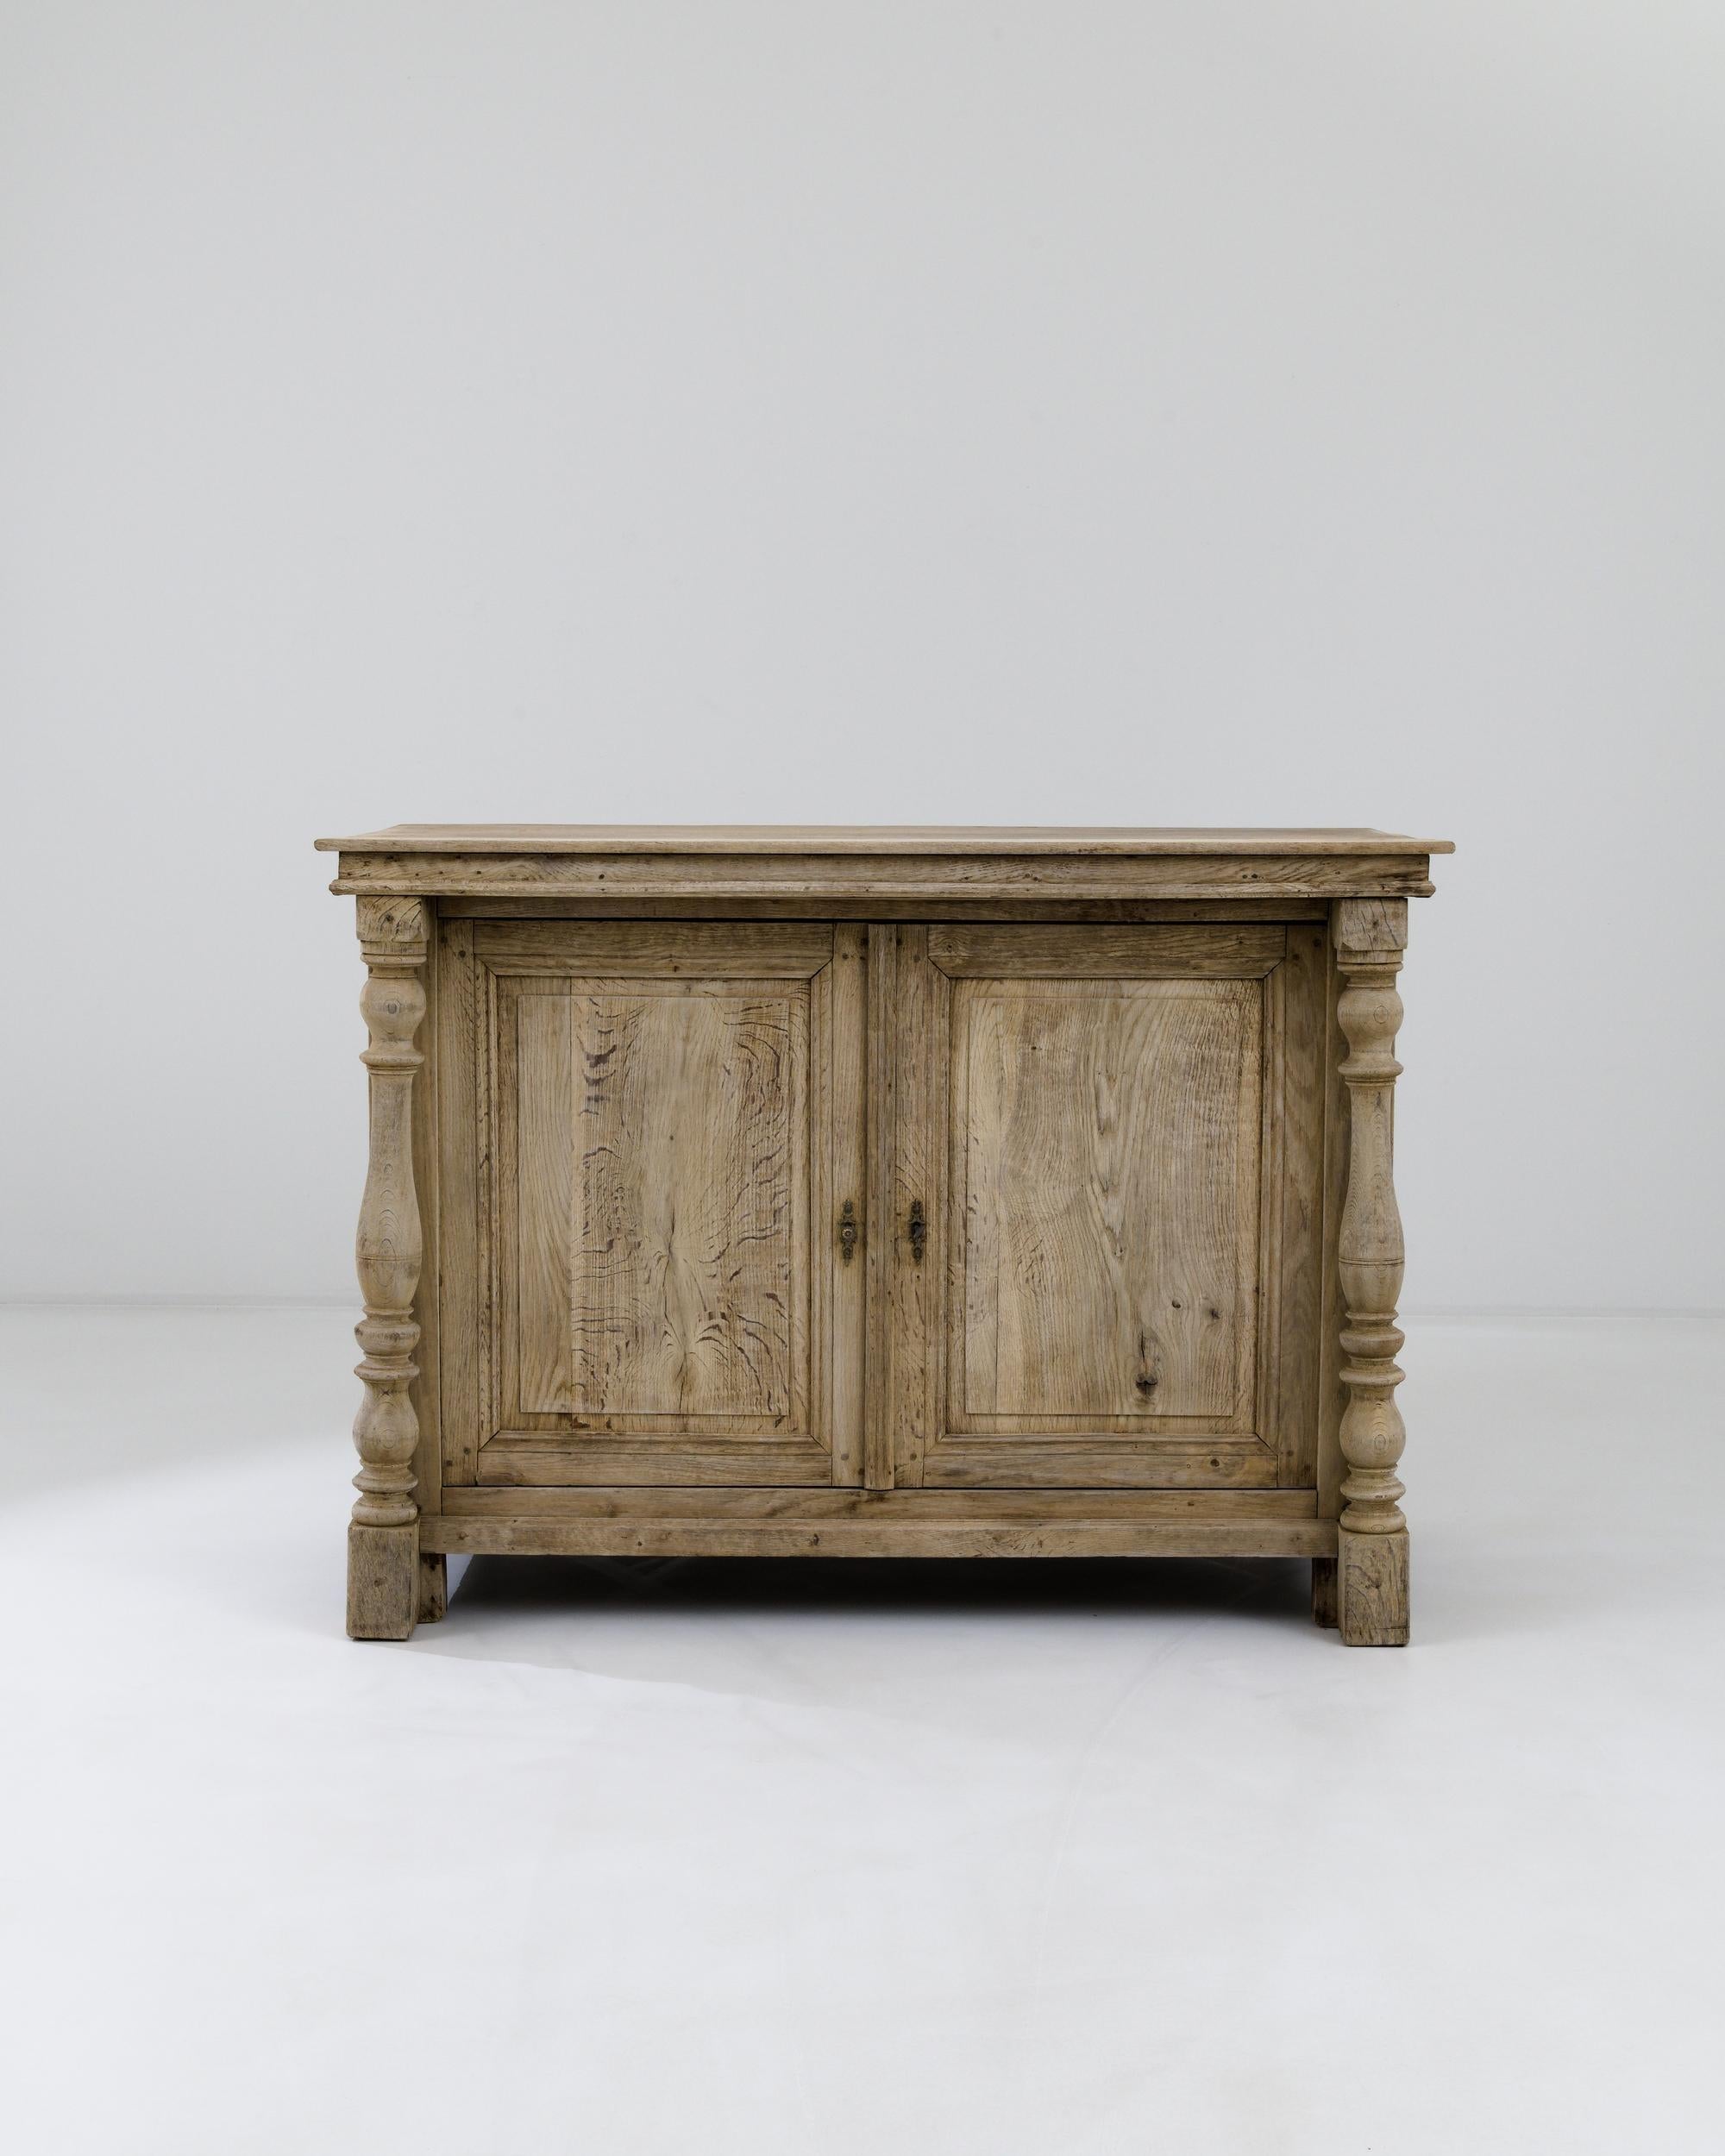 A wooden buffet created in 18th century France. This large and impressive buffet exudes a sense of traditional dignity, emphasized by its masterful construction and delightful details. Sumptuously lathed legs and lovingly crafted brass hardware